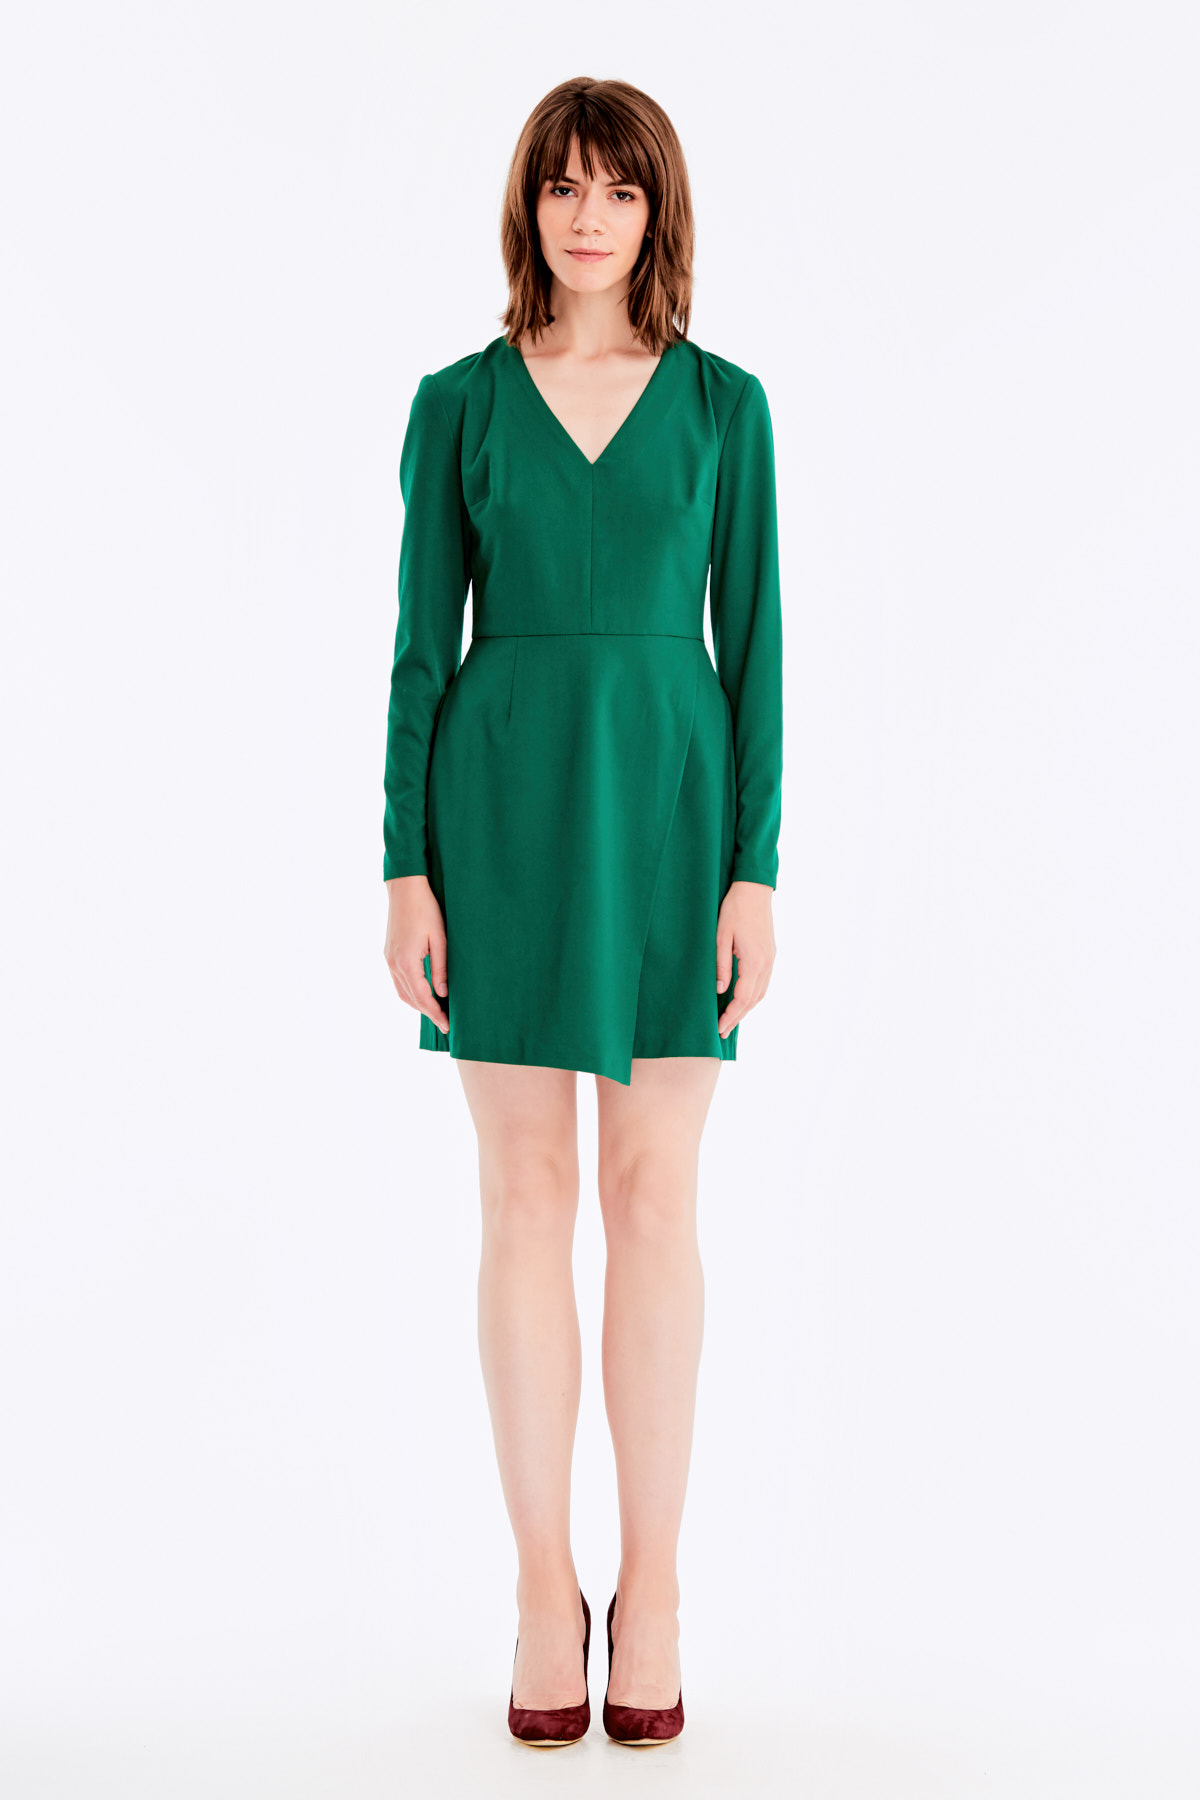 Wrap V-neck MustHave green dress , photo 3